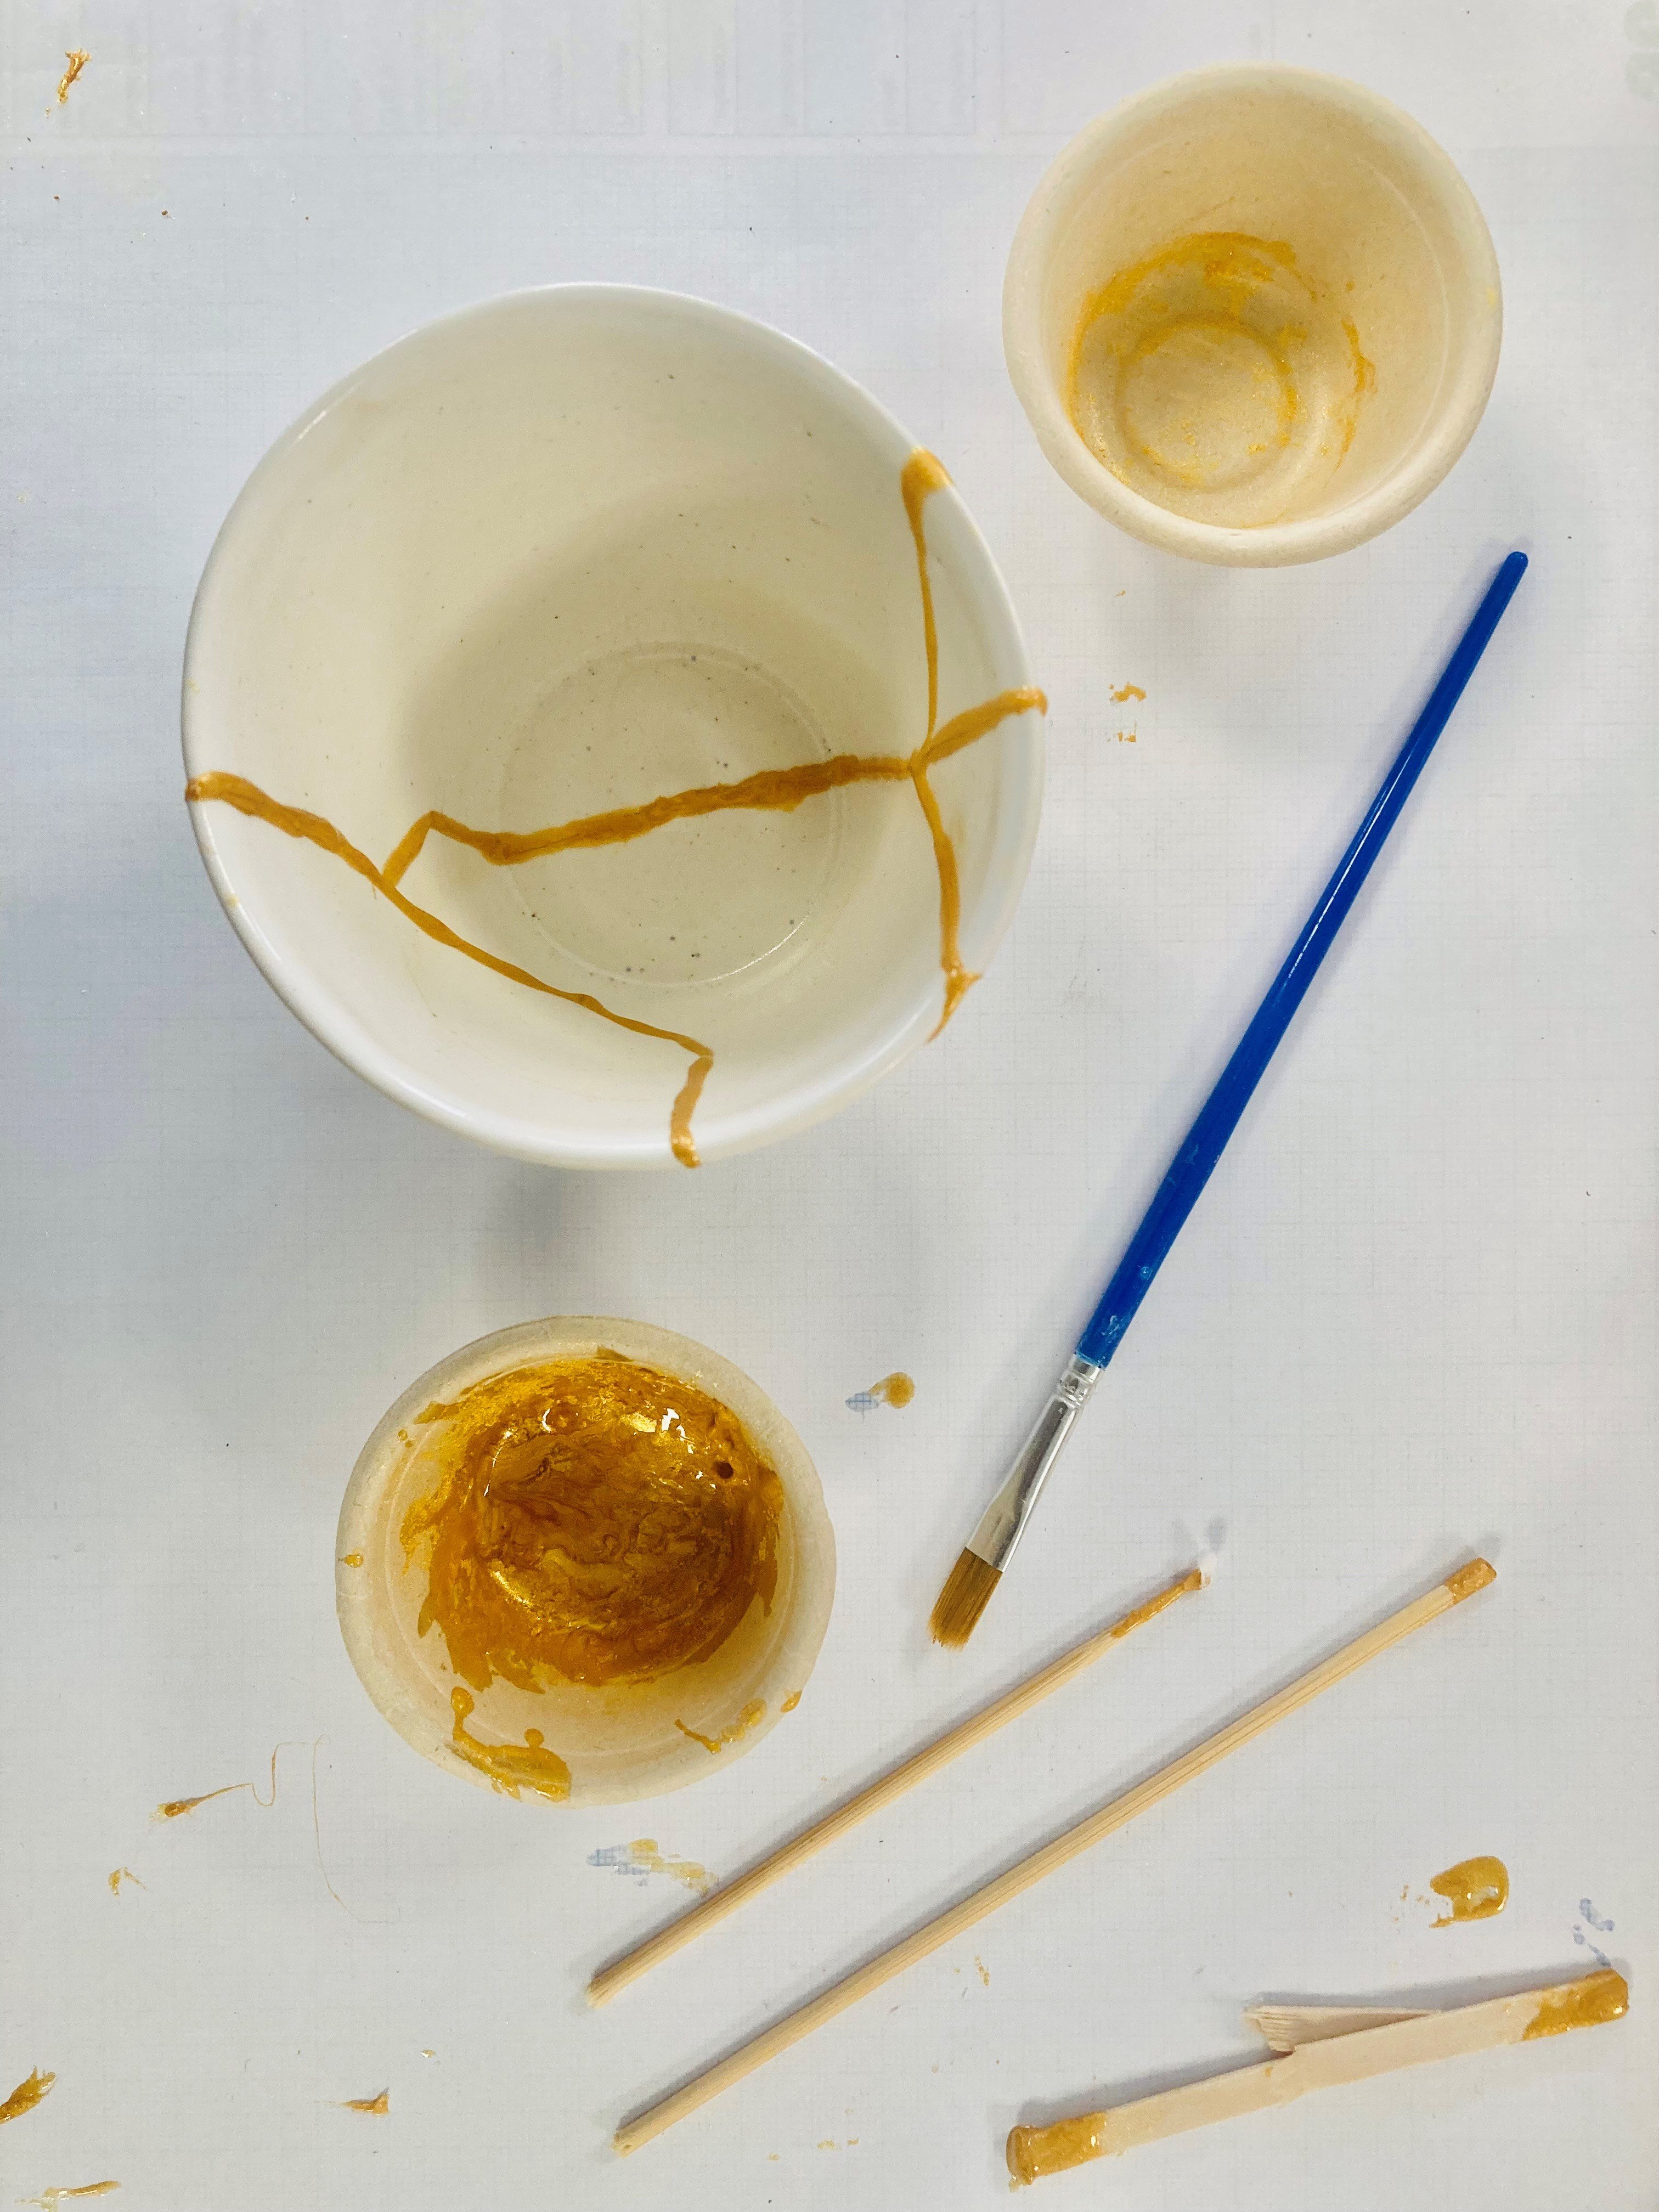 Discover the art of Japanese Pottery: Kintsugi